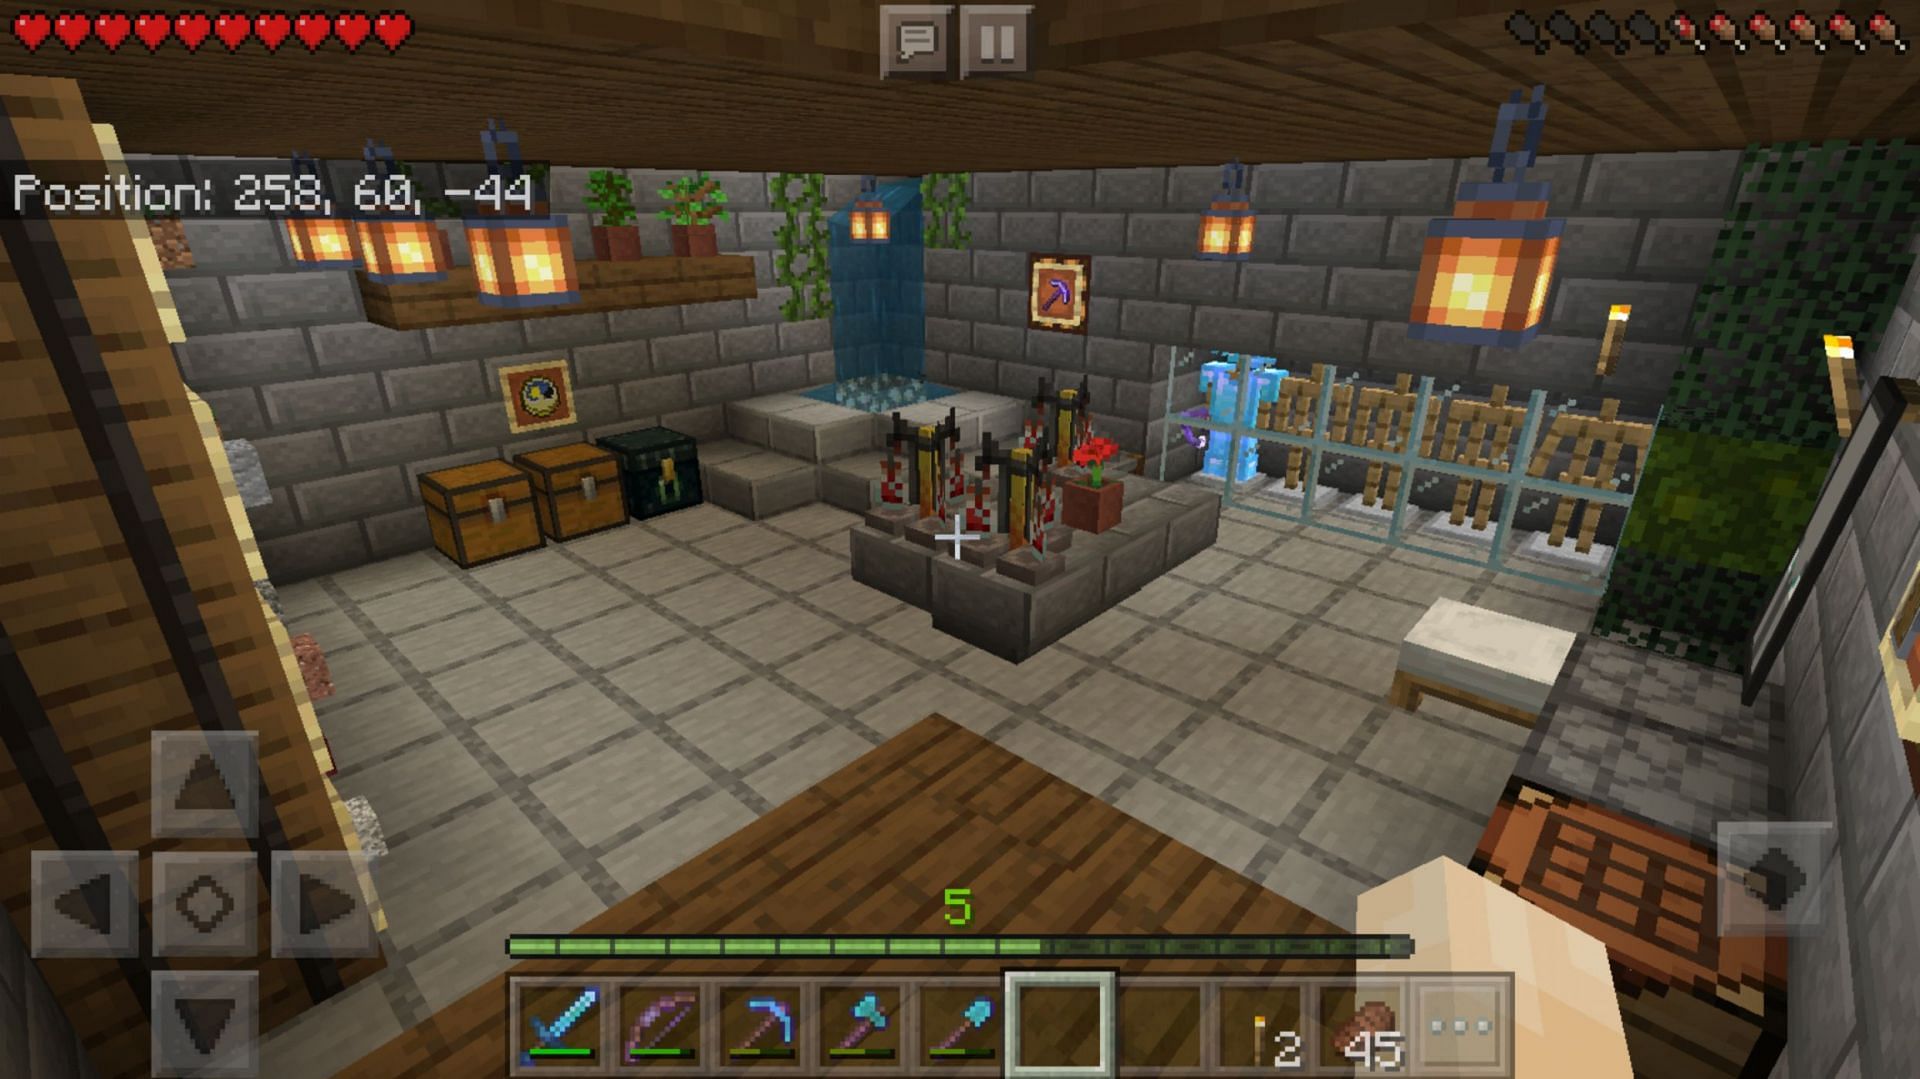 Losing access to crafting can be very problematic for players (Image via Mojang)